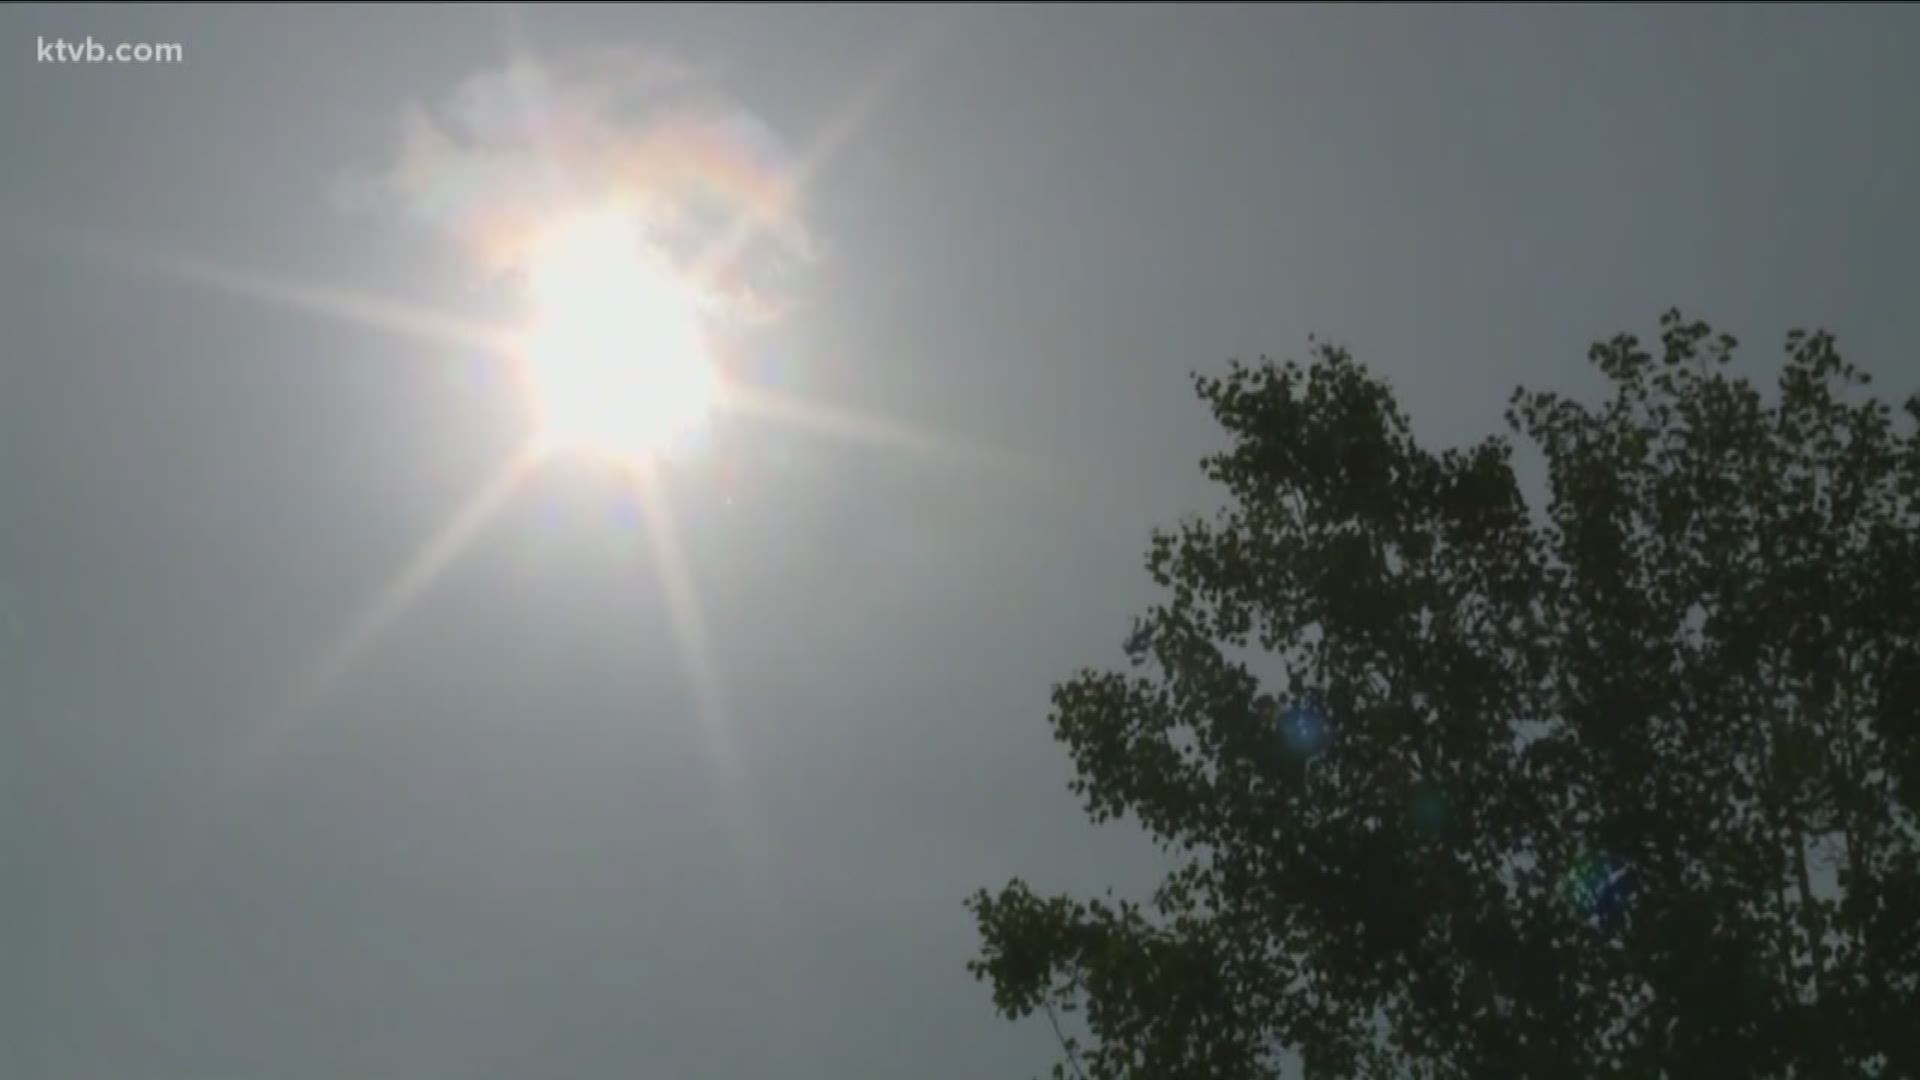 We spoke with a dermatologist about what you need to protect yourself from the sun's harmful rays.